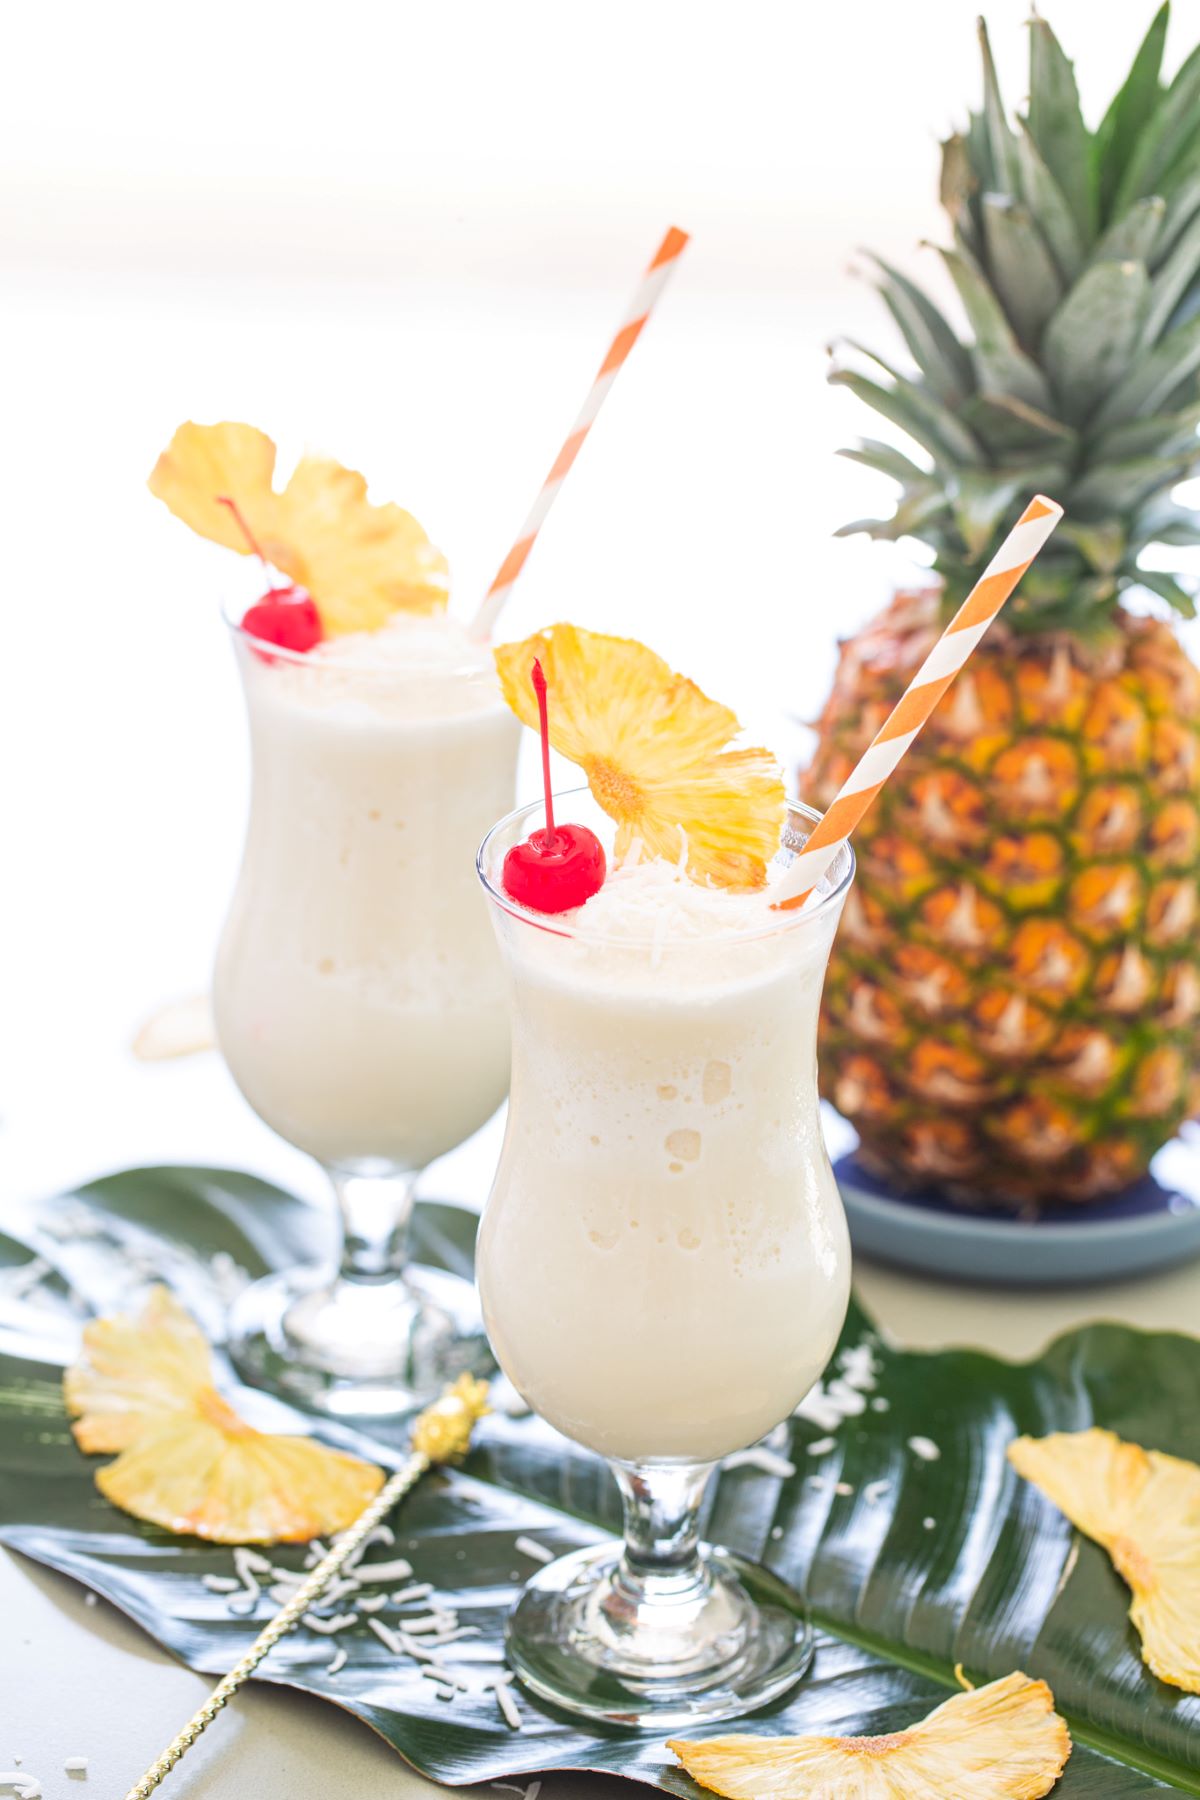 Two pina coladas garnished with a red cherry, dried pineapple wedge, and shredded coconut.